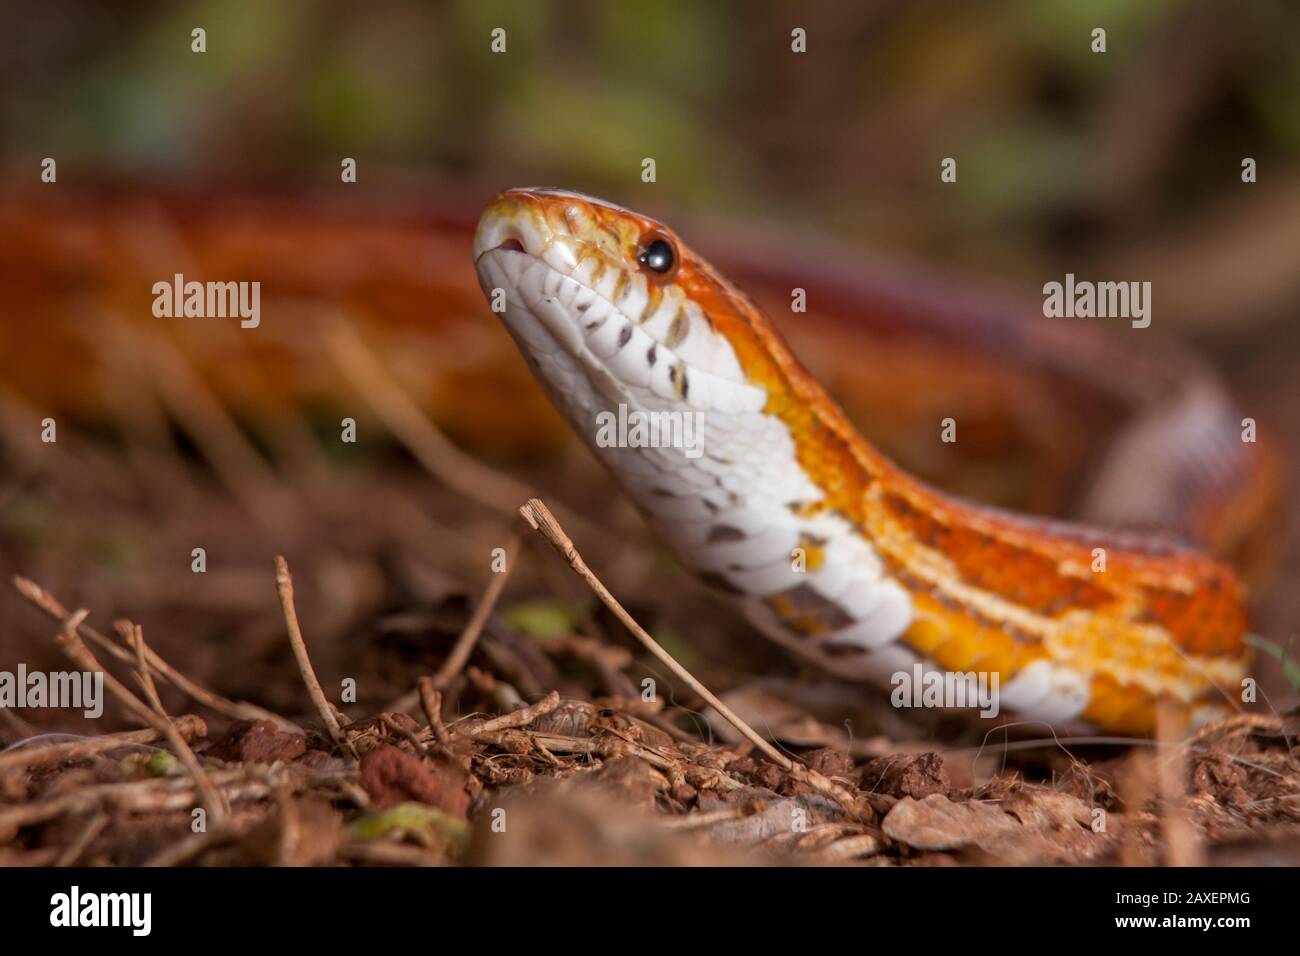 Classic corn snake outdoors slithering on grass, frontal close-up of the snake head Stock Photo